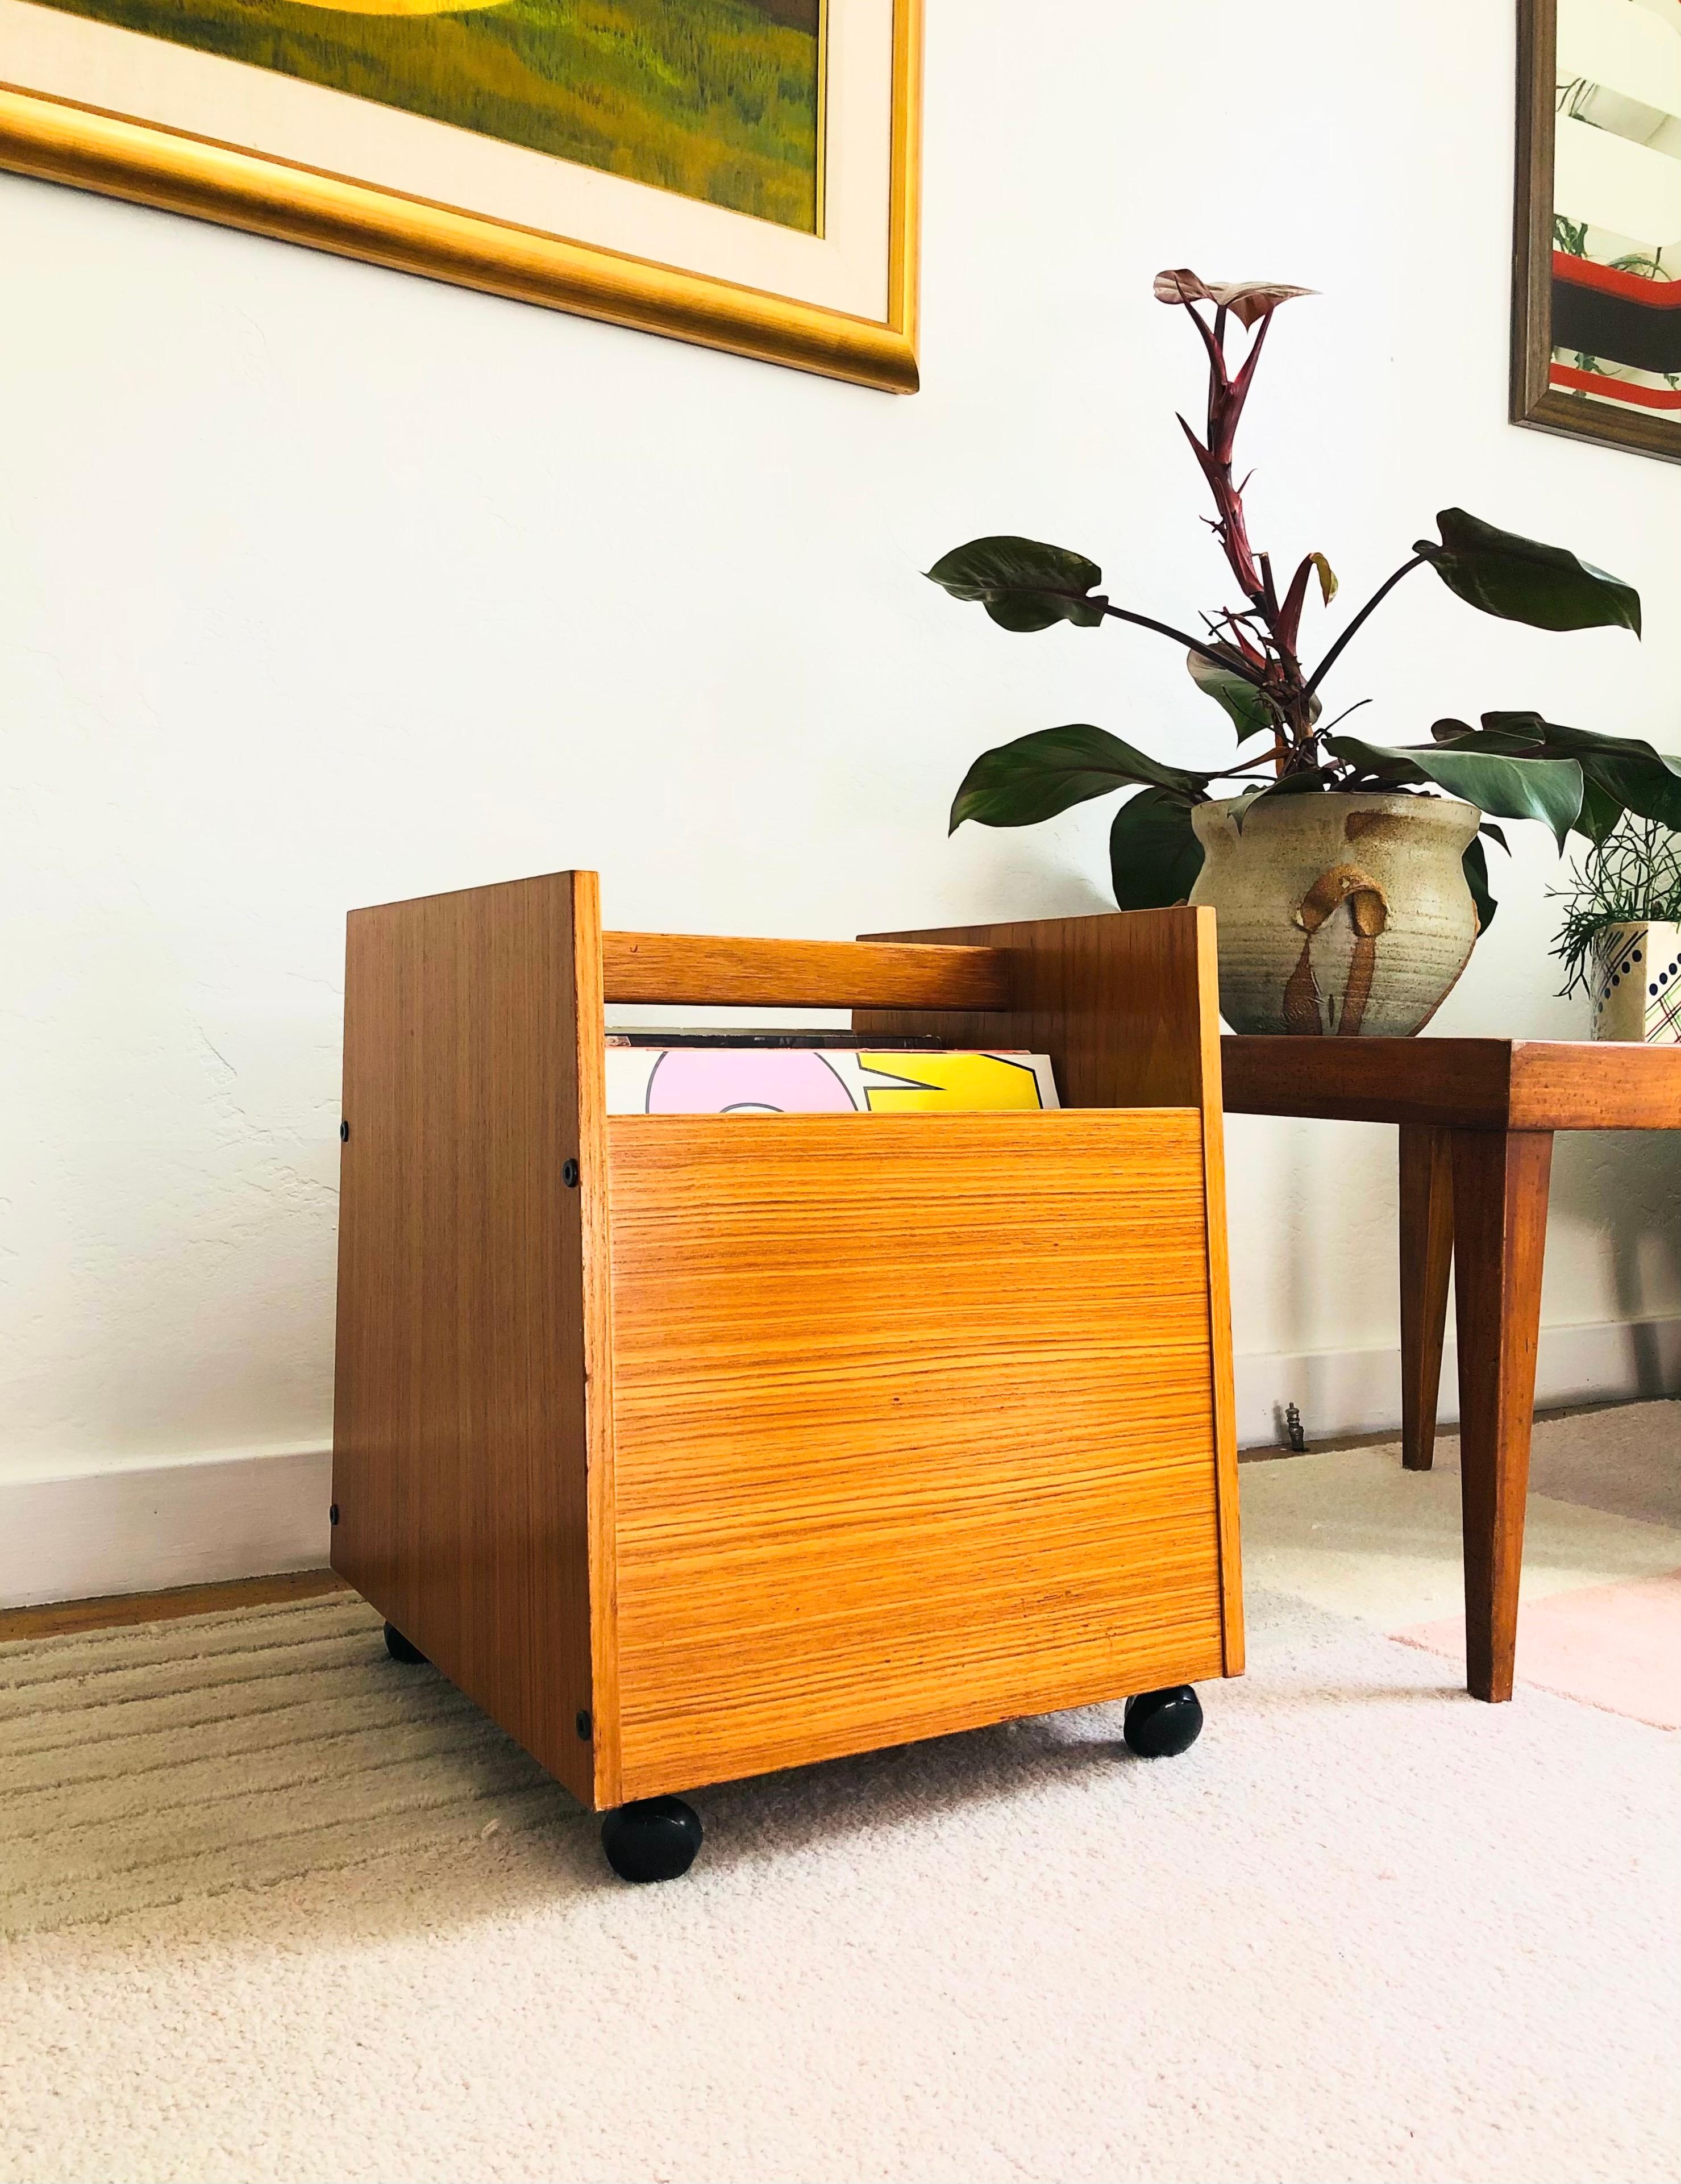 A mid century teak record holder designed by Rolf Hesland for Bruksbo of Norway. Features 3 divided compartments for storing records or magazines and rolls smoothly on 4 casters. The original label is on the base.